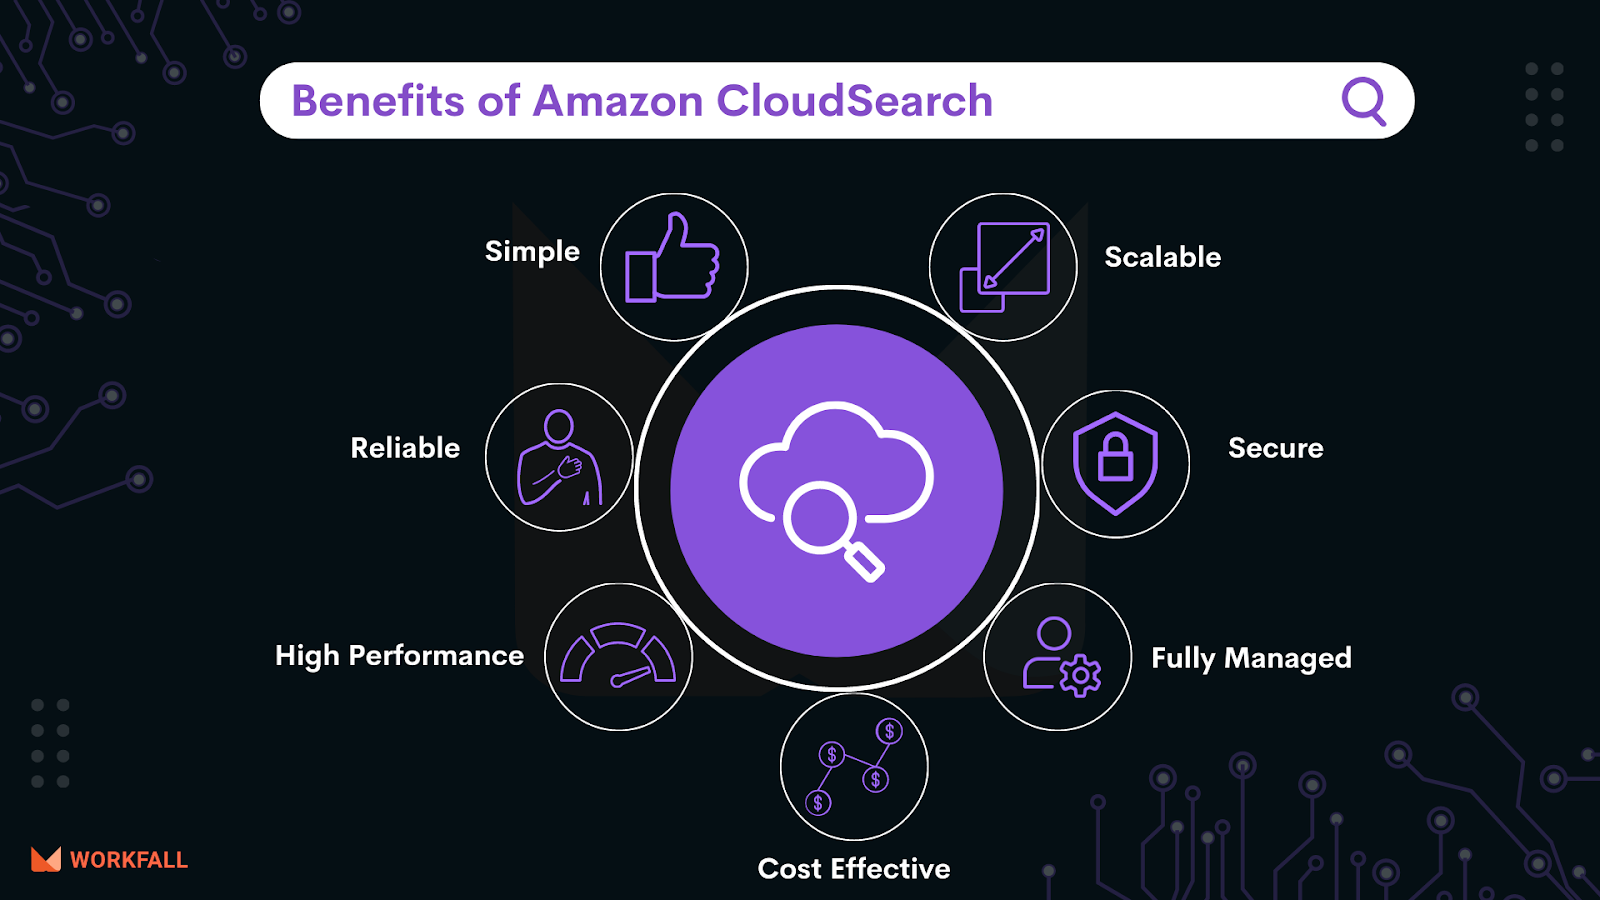 Benefits of Amazon CloudSearch